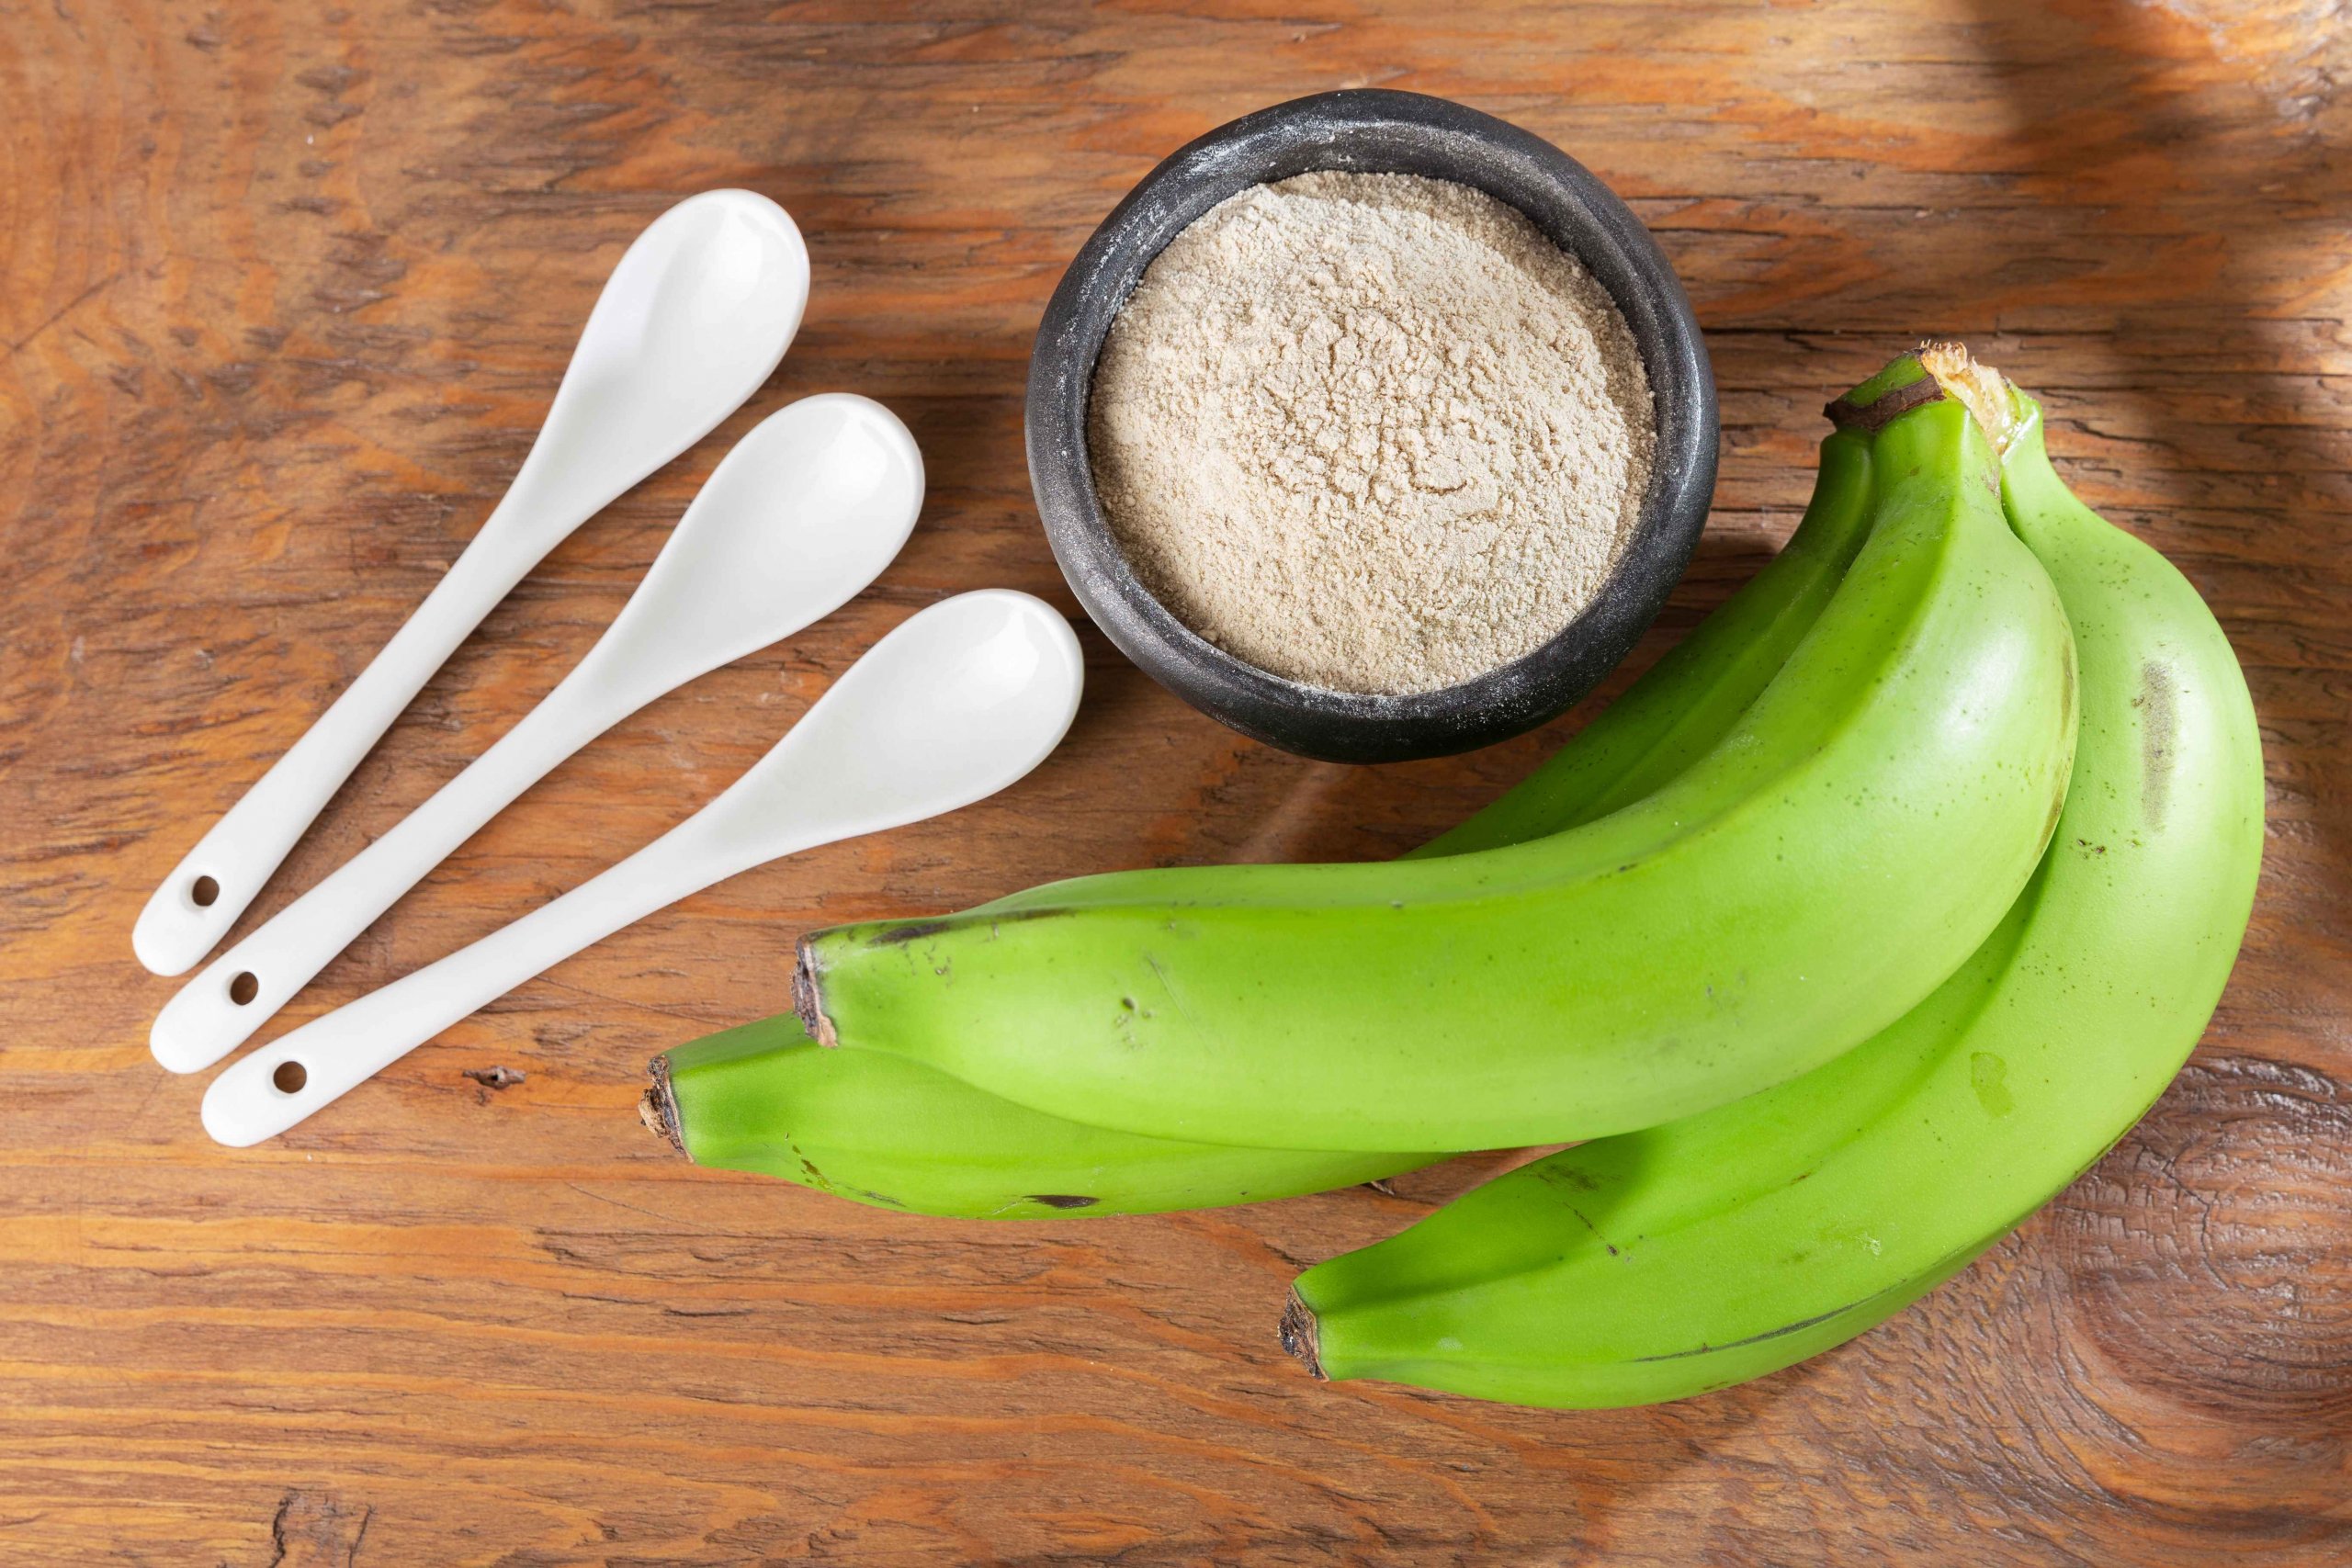 An under-ripe green banana high in resistant starch